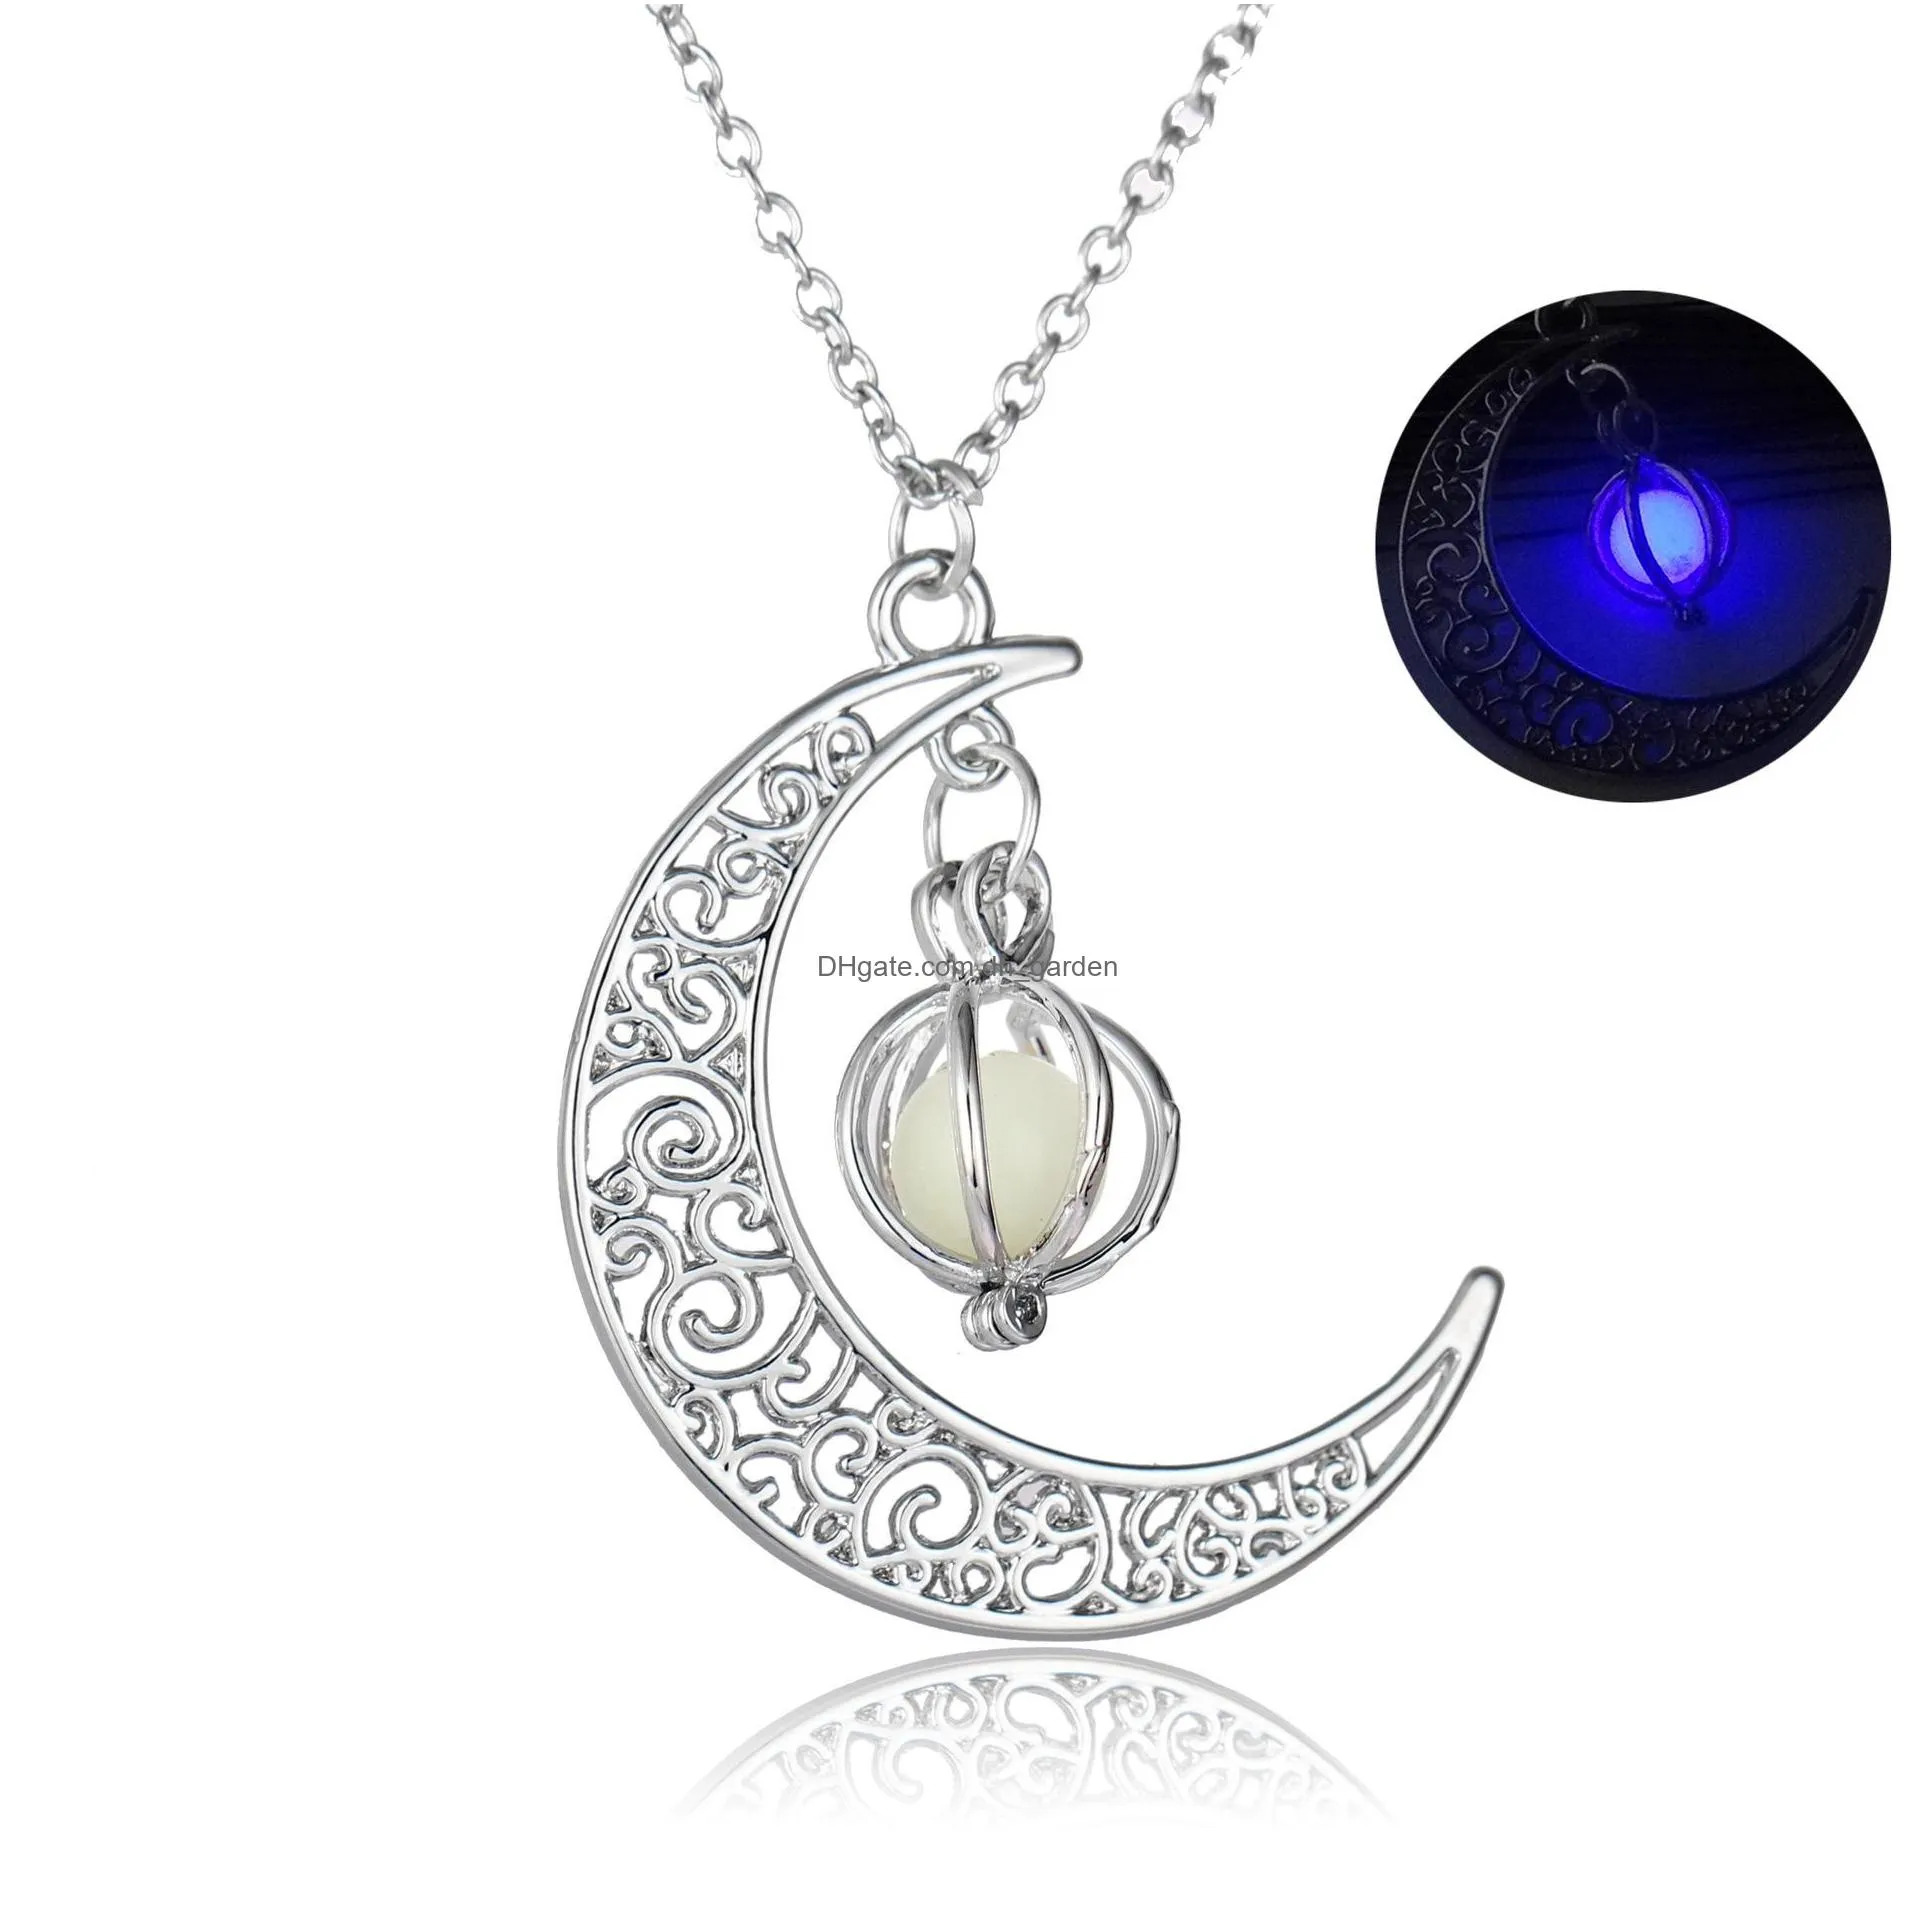 2017 essentials oil diffuser necklace glow in the dark aromatherapy floating lockets moon pendant necklaces for women fashion jewelry